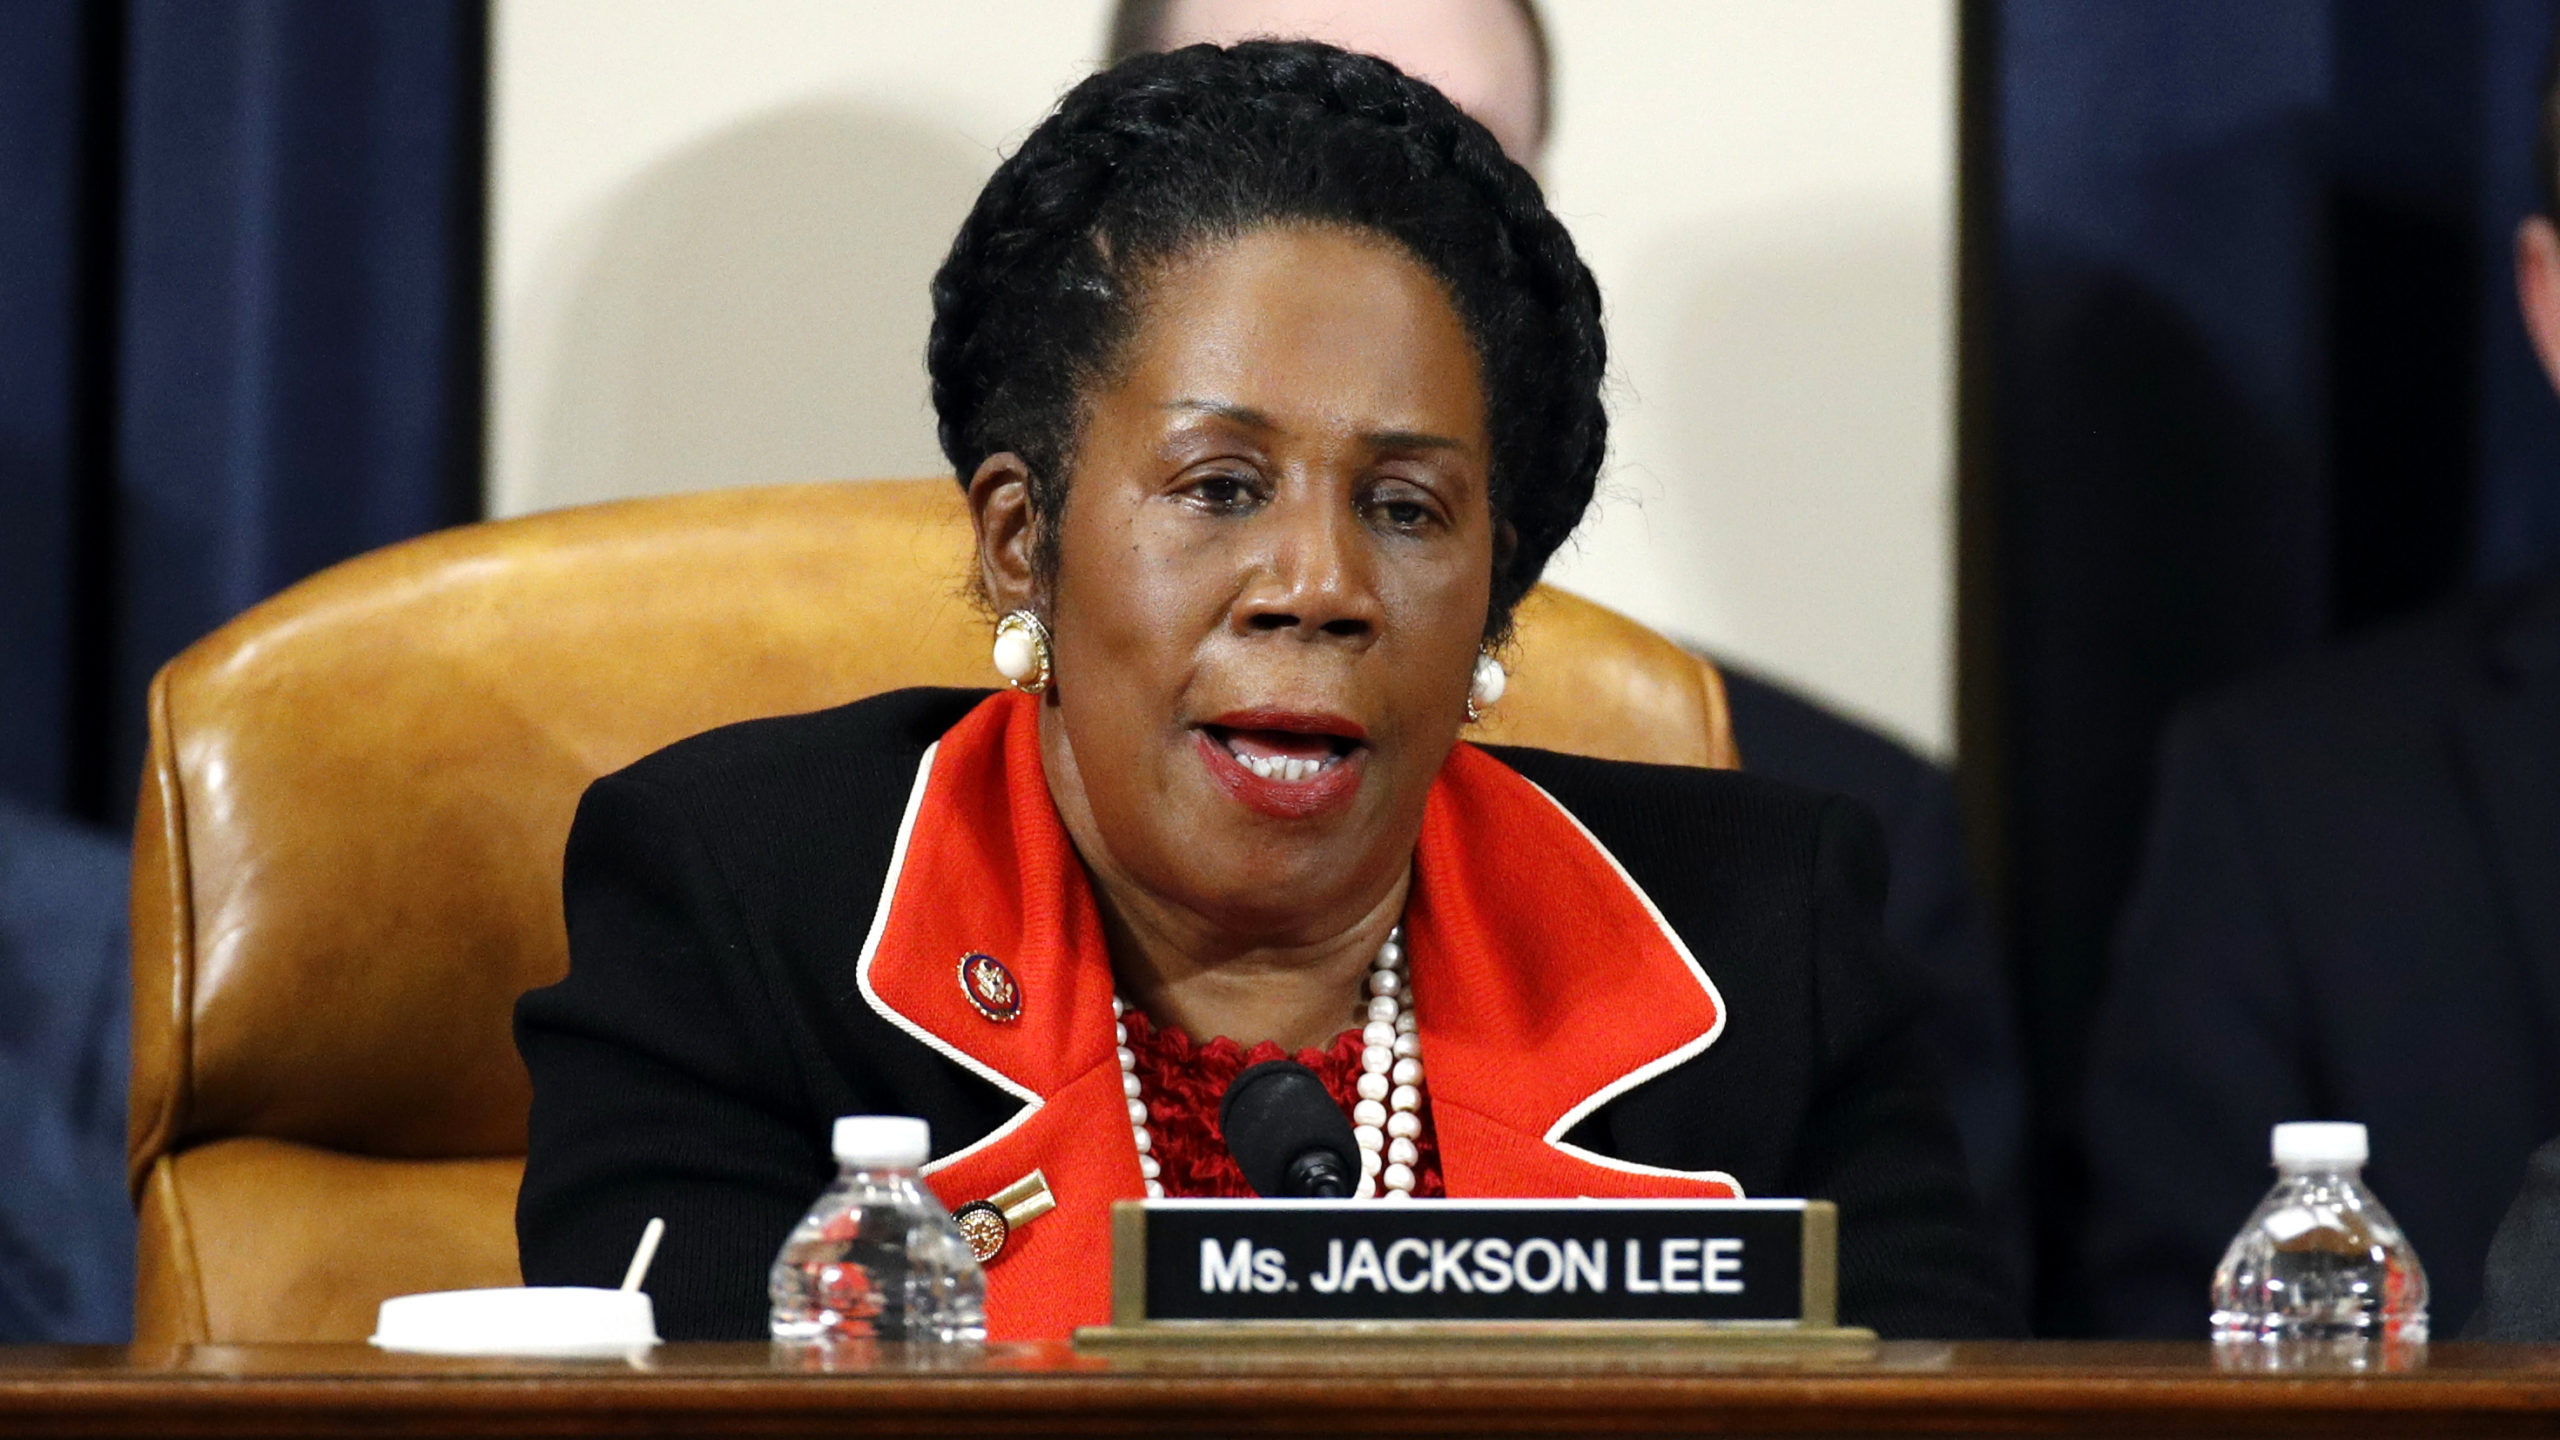 Sheila Jackson Lee points fingers after suggesting moon is gas-based